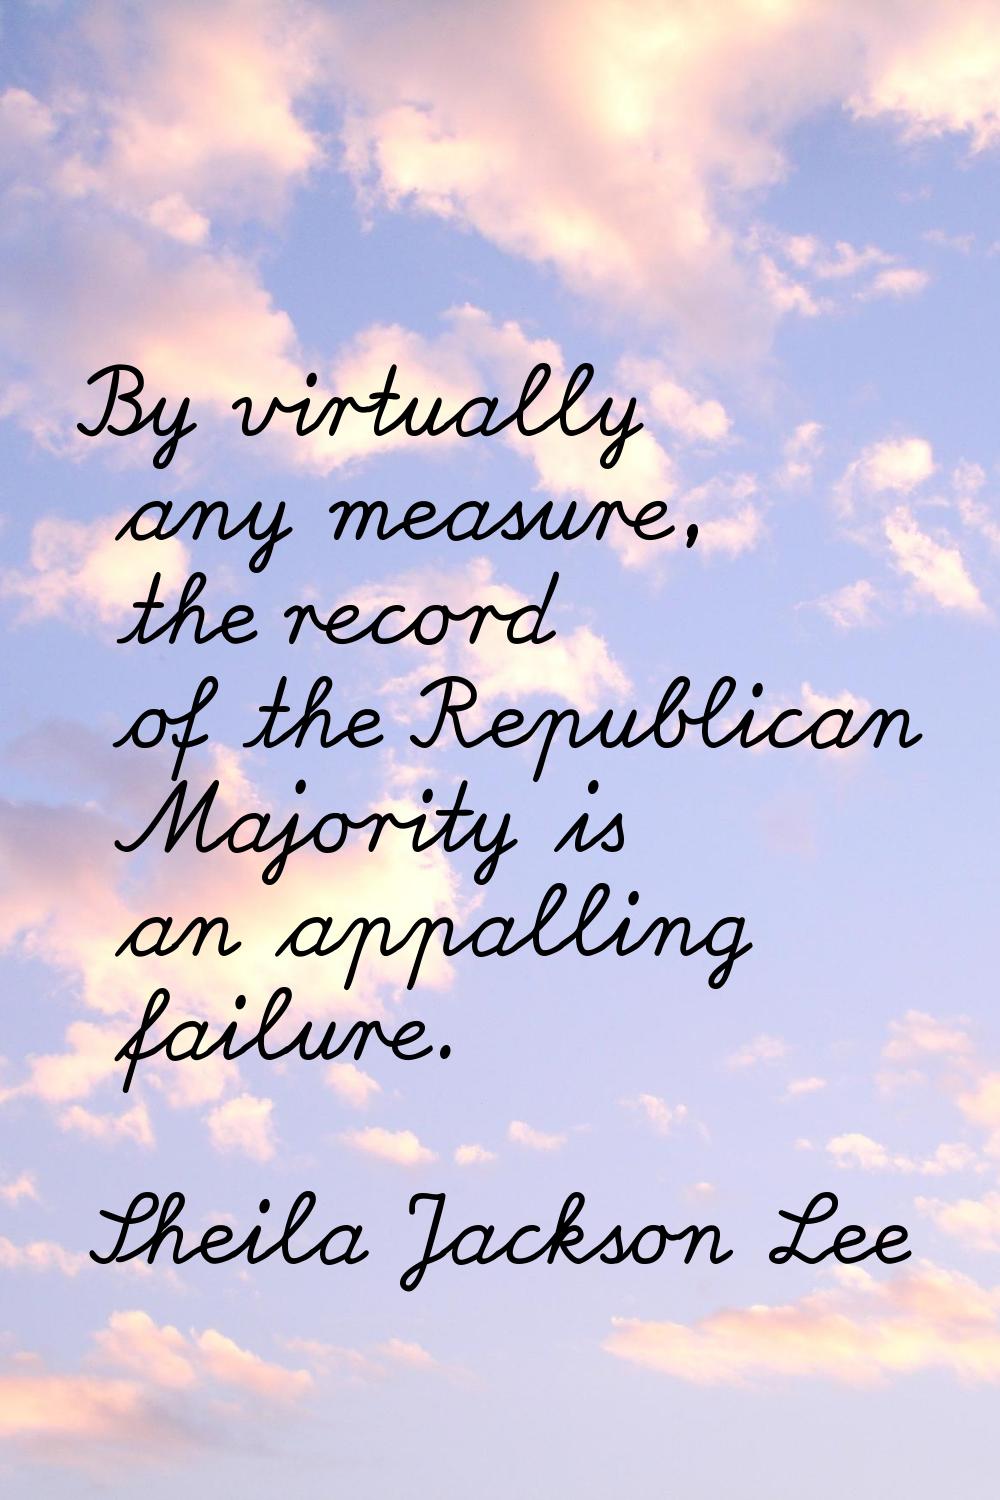 By virtually any measure, the record of the Republican Majority is an appalling failure.